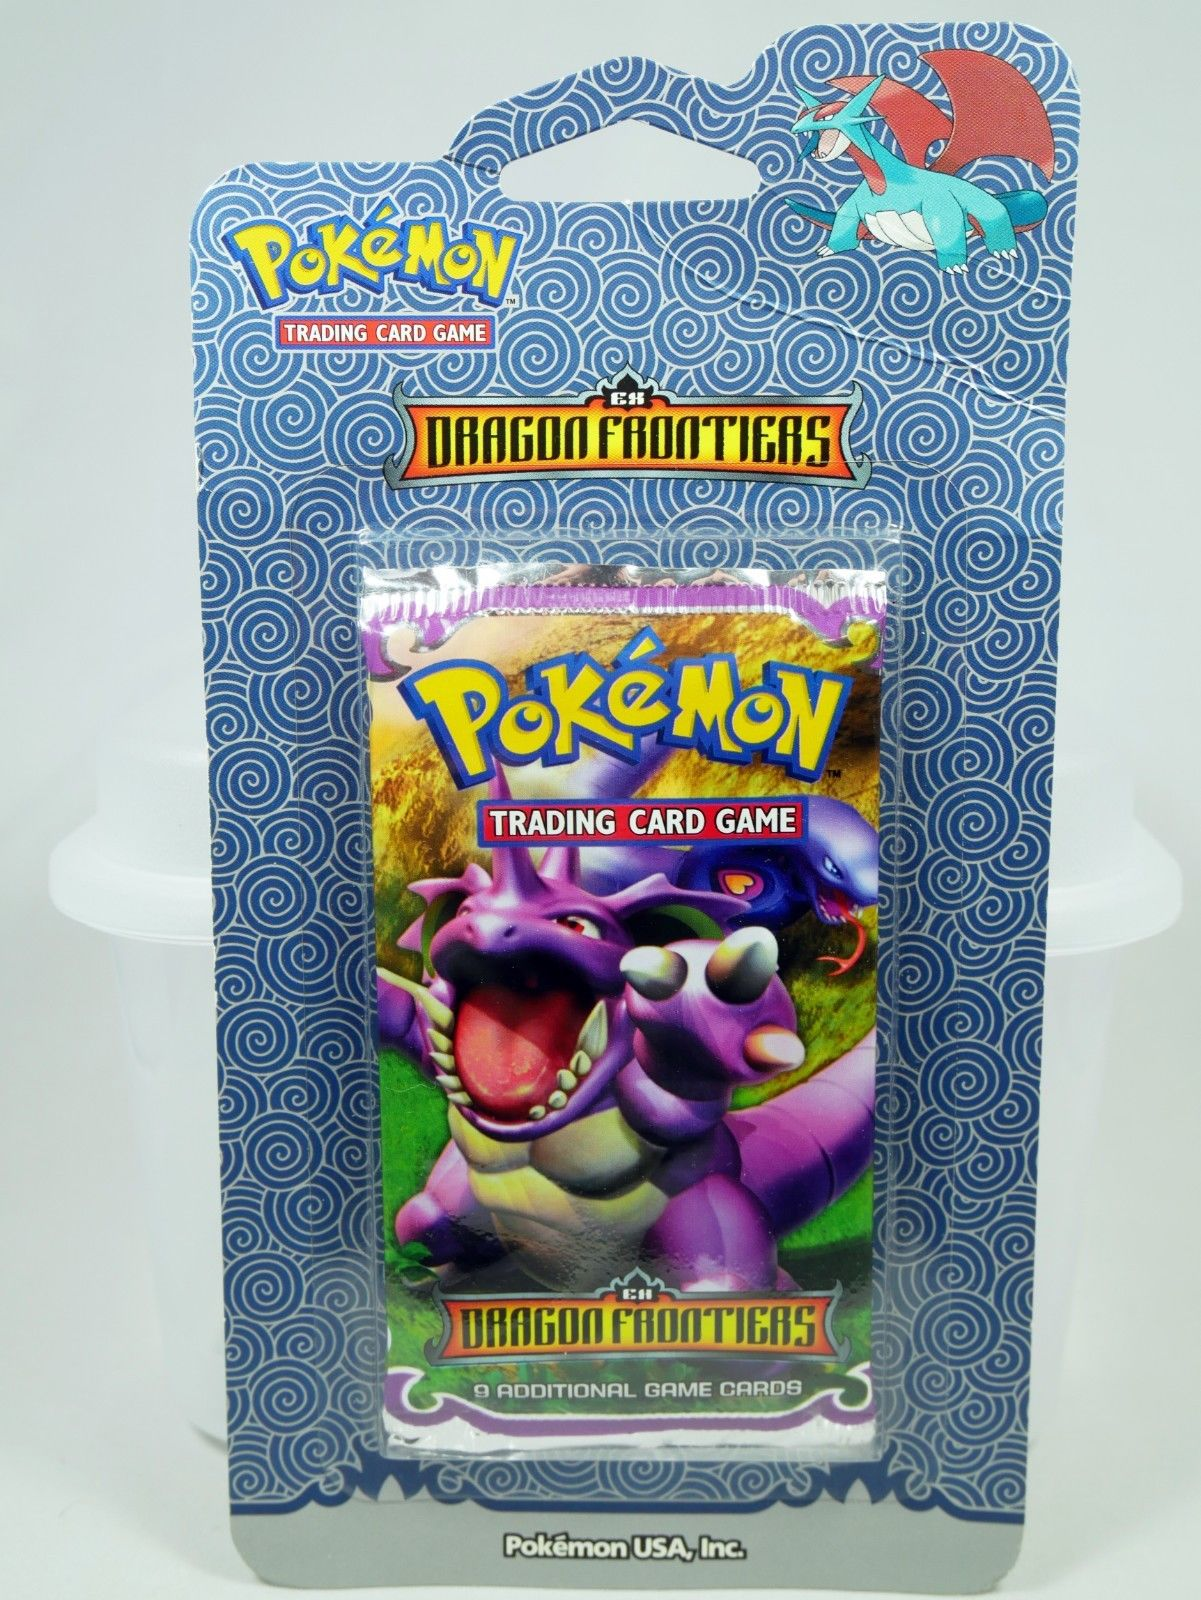 Pokemon EX Dragon Frontiers Blister Pack